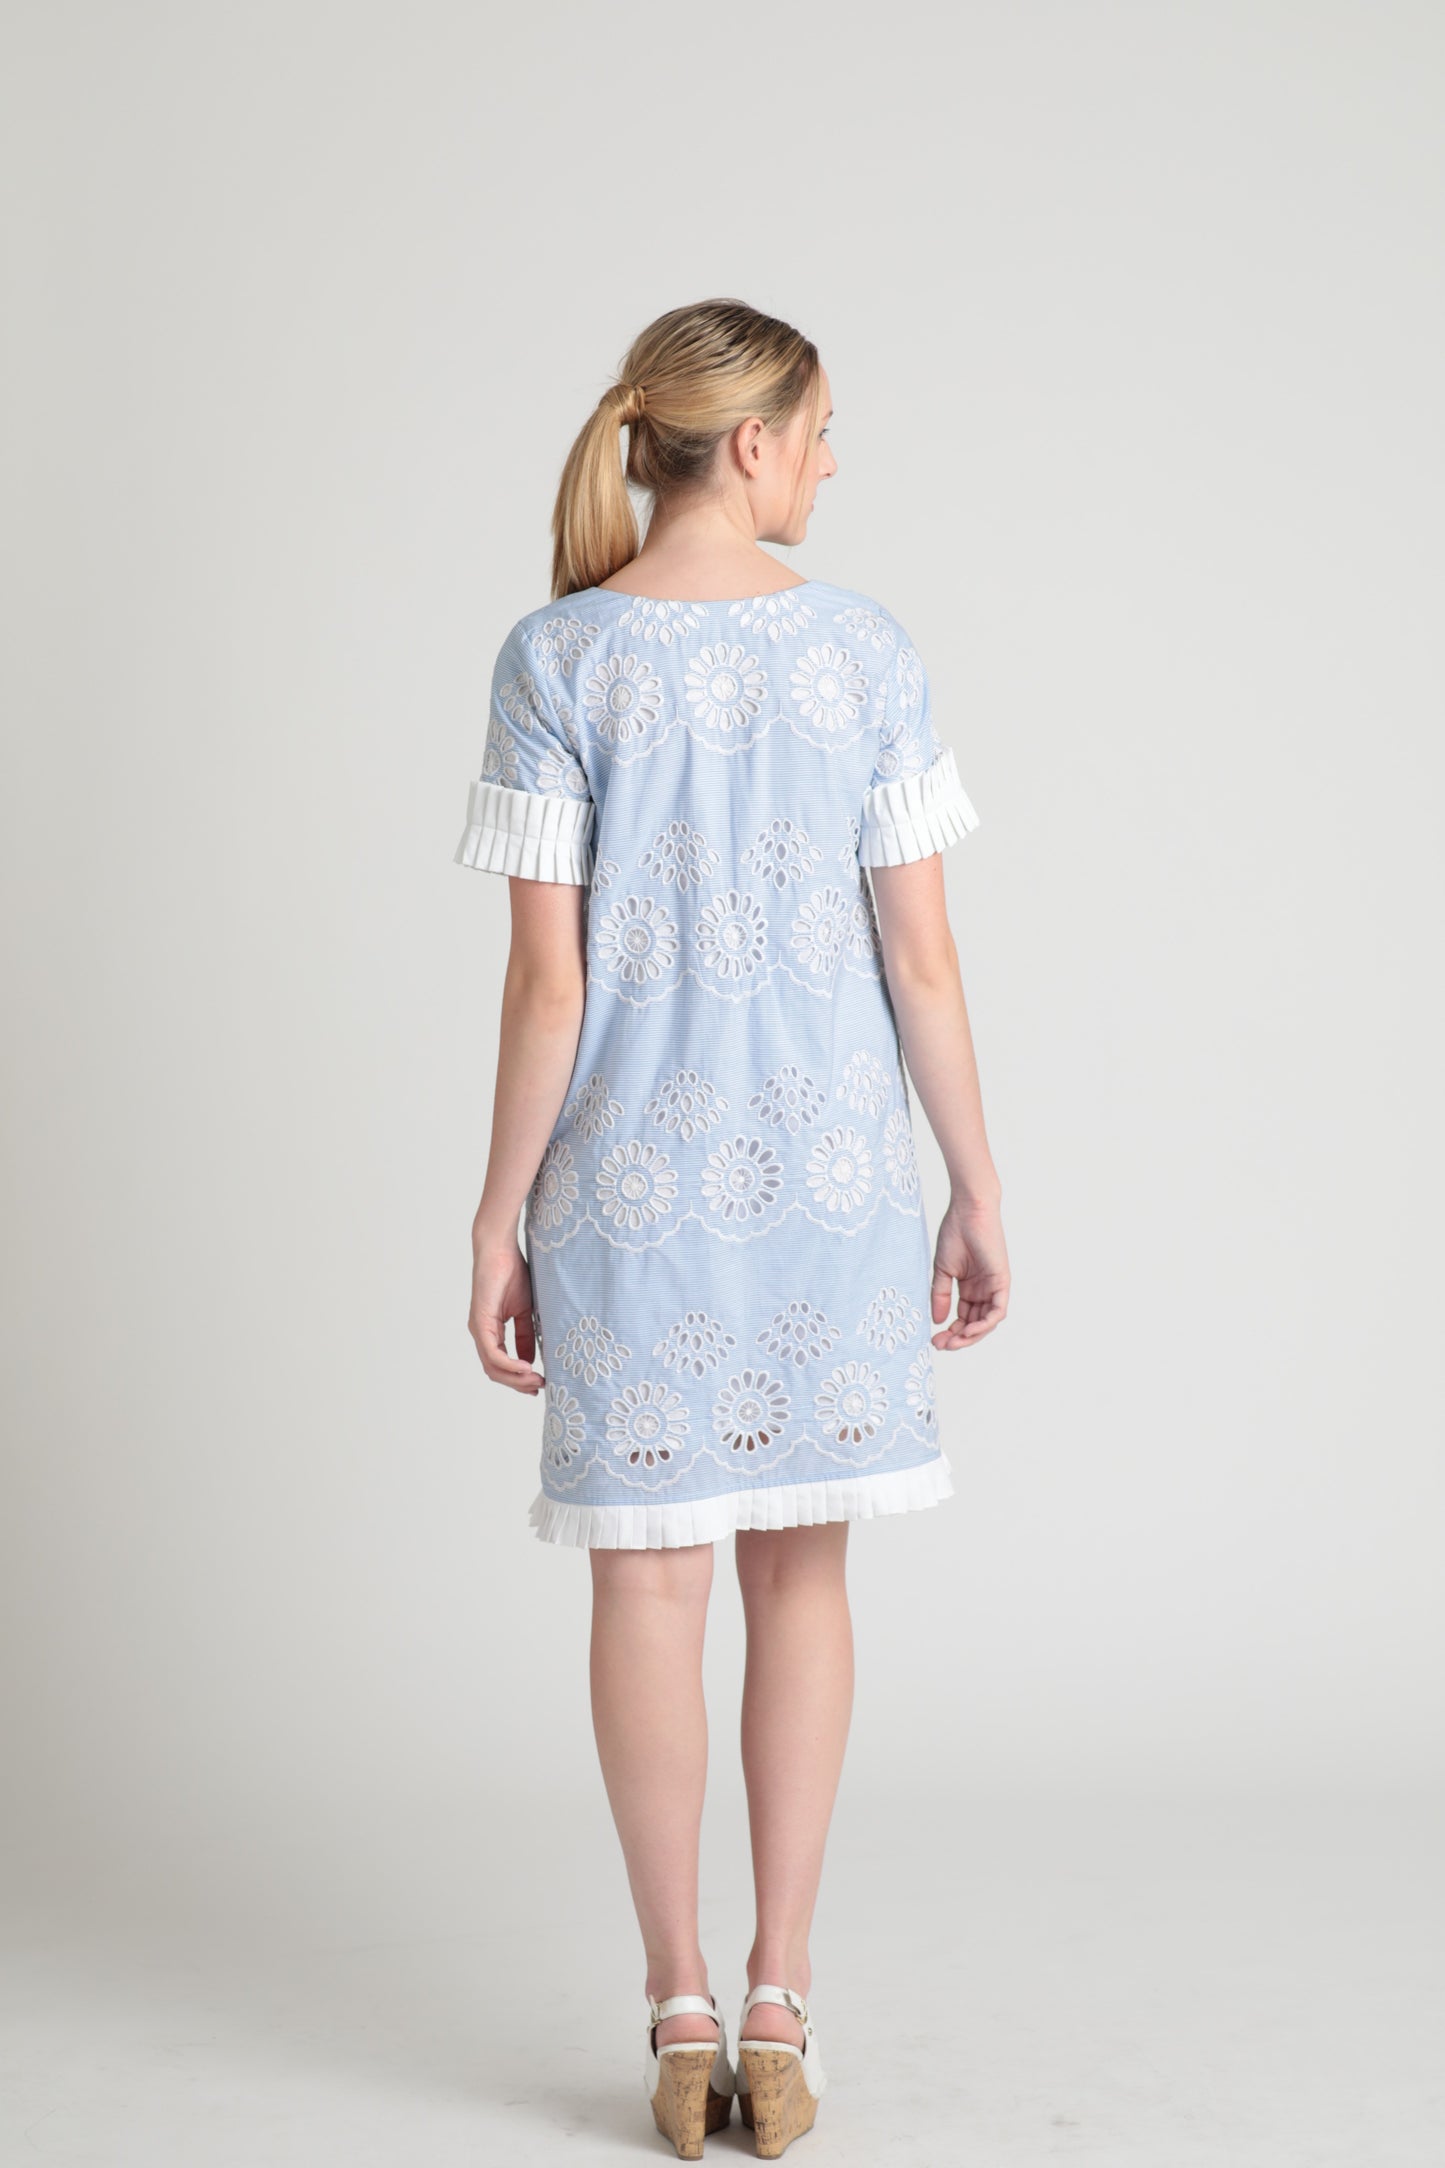 Cotton pinstripe floral embroidery shift dress